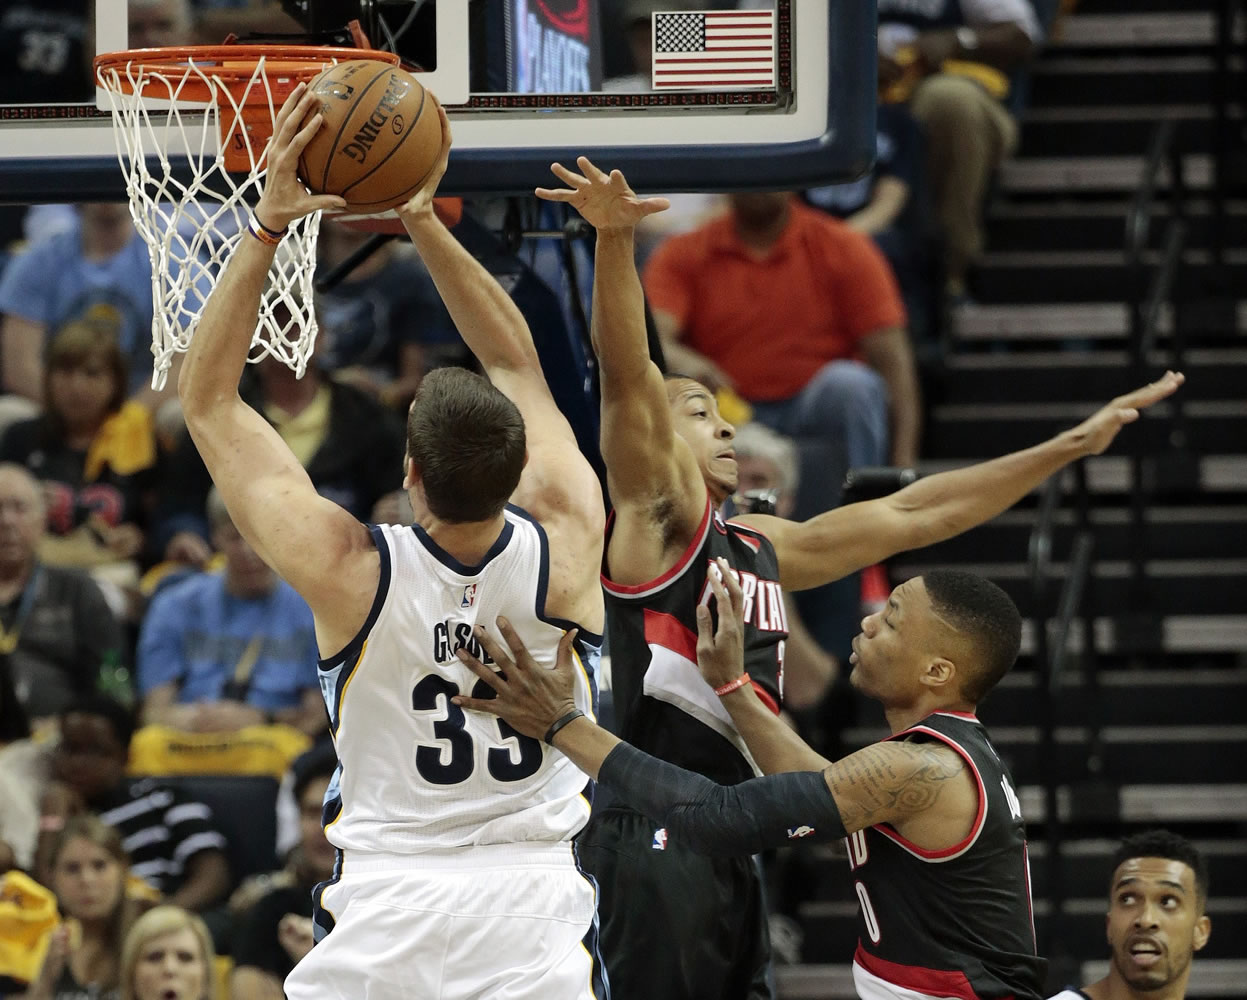 Memphis center Marc Gasol (33) shoots past Portland defenders C.J. McCollum, center, and Damian Lillard, right, in the first half of Game 1 on Sunday, April 19, 2015, in Memphis, Tenn.